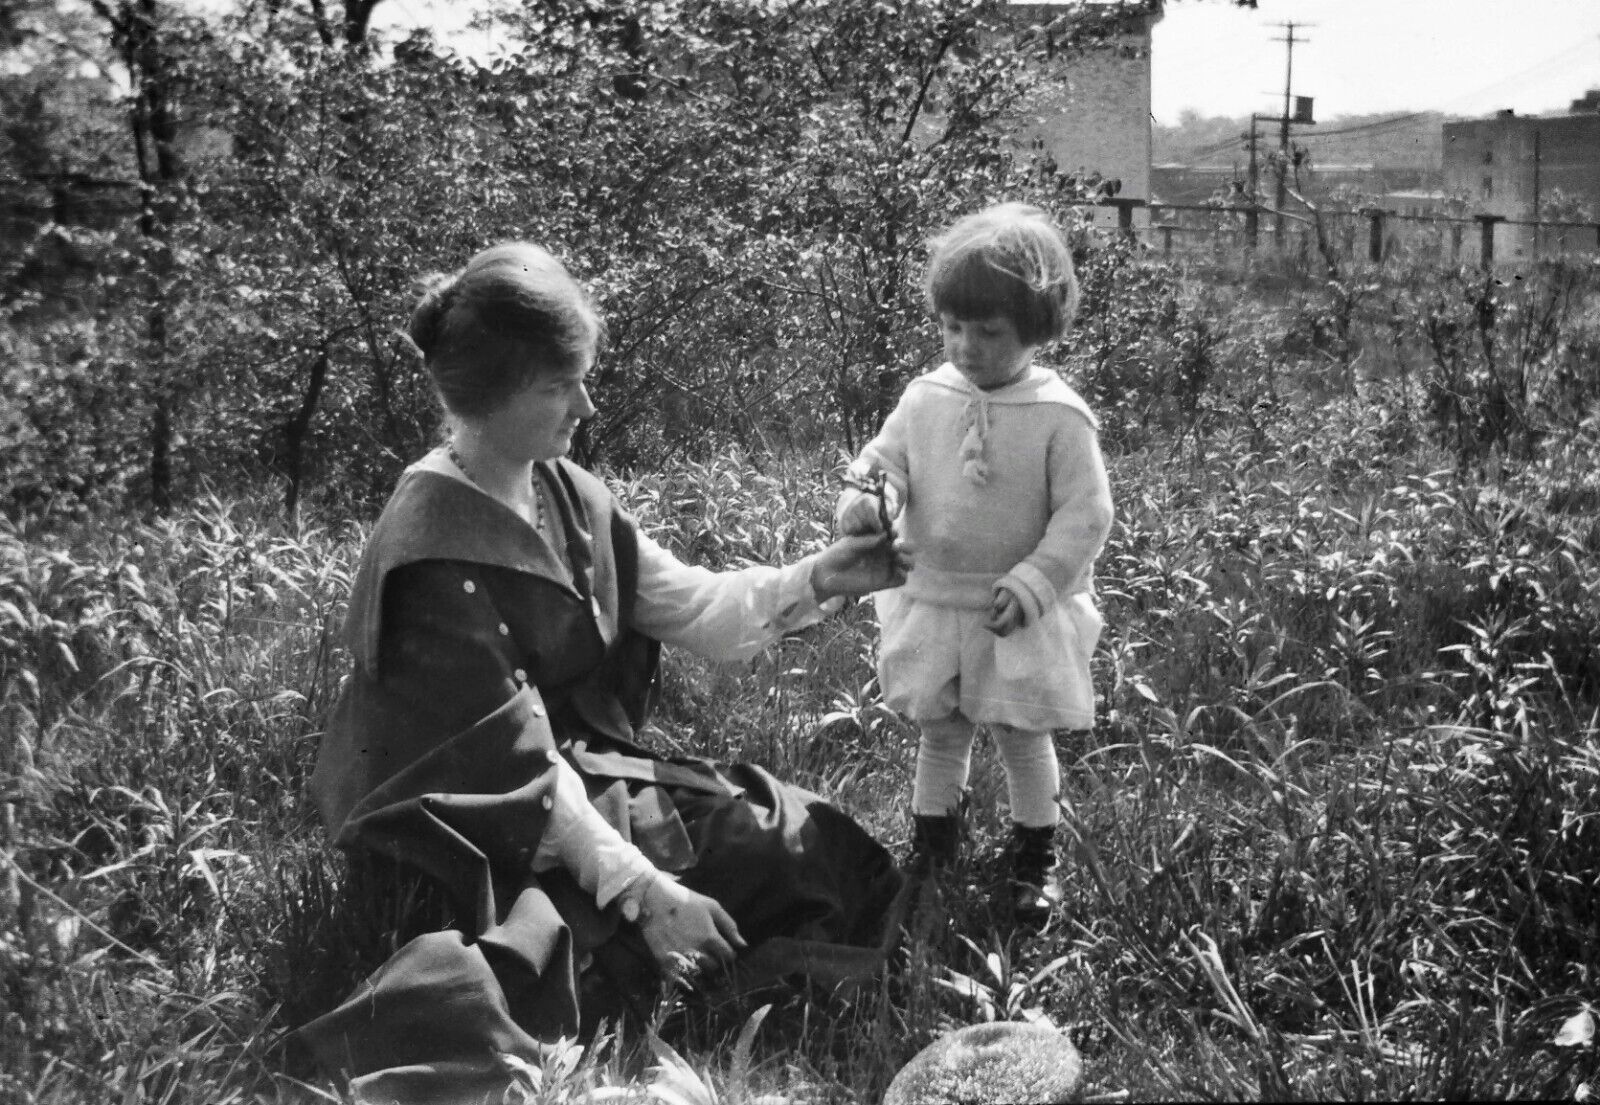 Vintage 1910s Photo Negative of Idyllic Scene Mother & Child Sit in Tall Grass